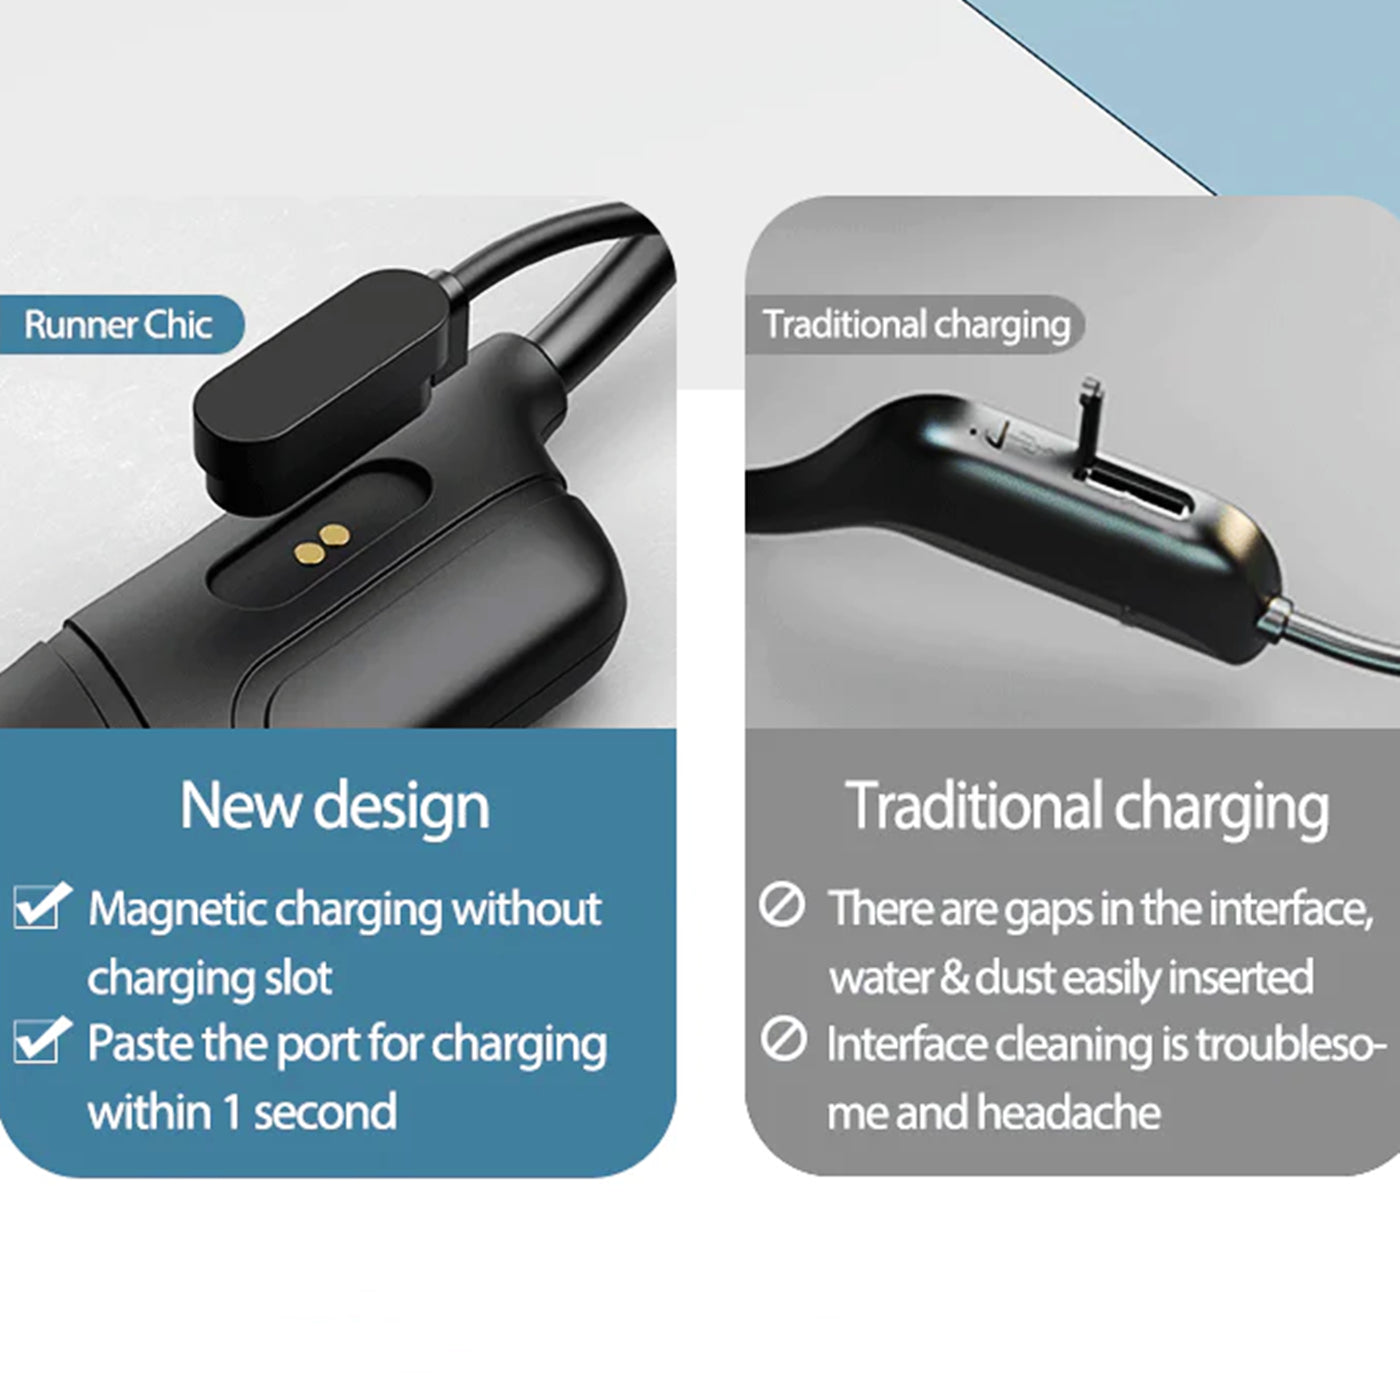 Compare magnetic charging with traditional charging methods